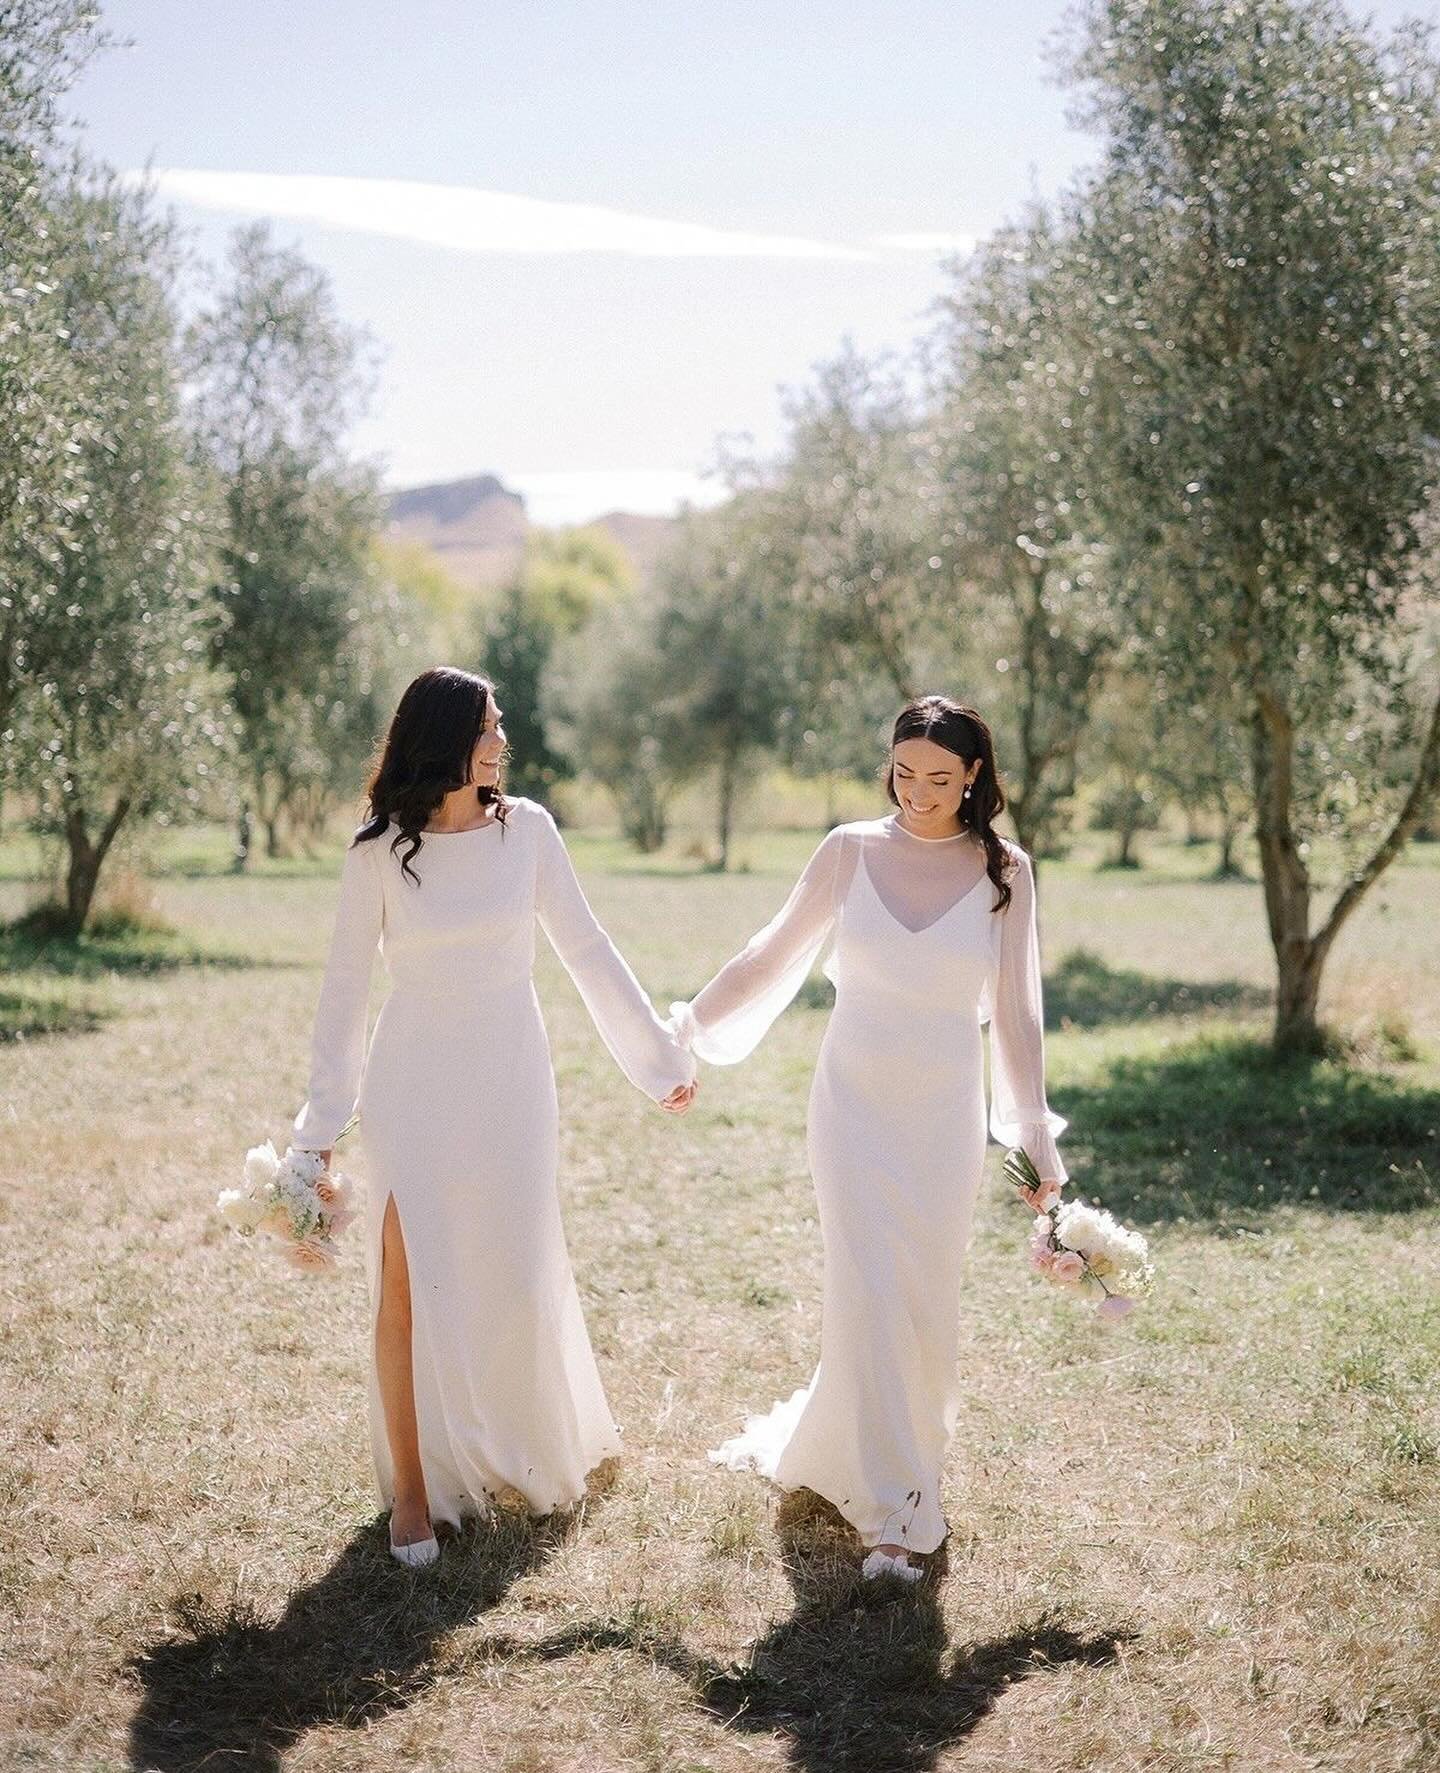 Hayes brides | Jess &amp; Laney

A special few months working with Jess and Laney on their wedding dresses 🤍
It truly felt like an honour to create these dresses for this beautiful day and to witness moments of their love and excitement in the lead 